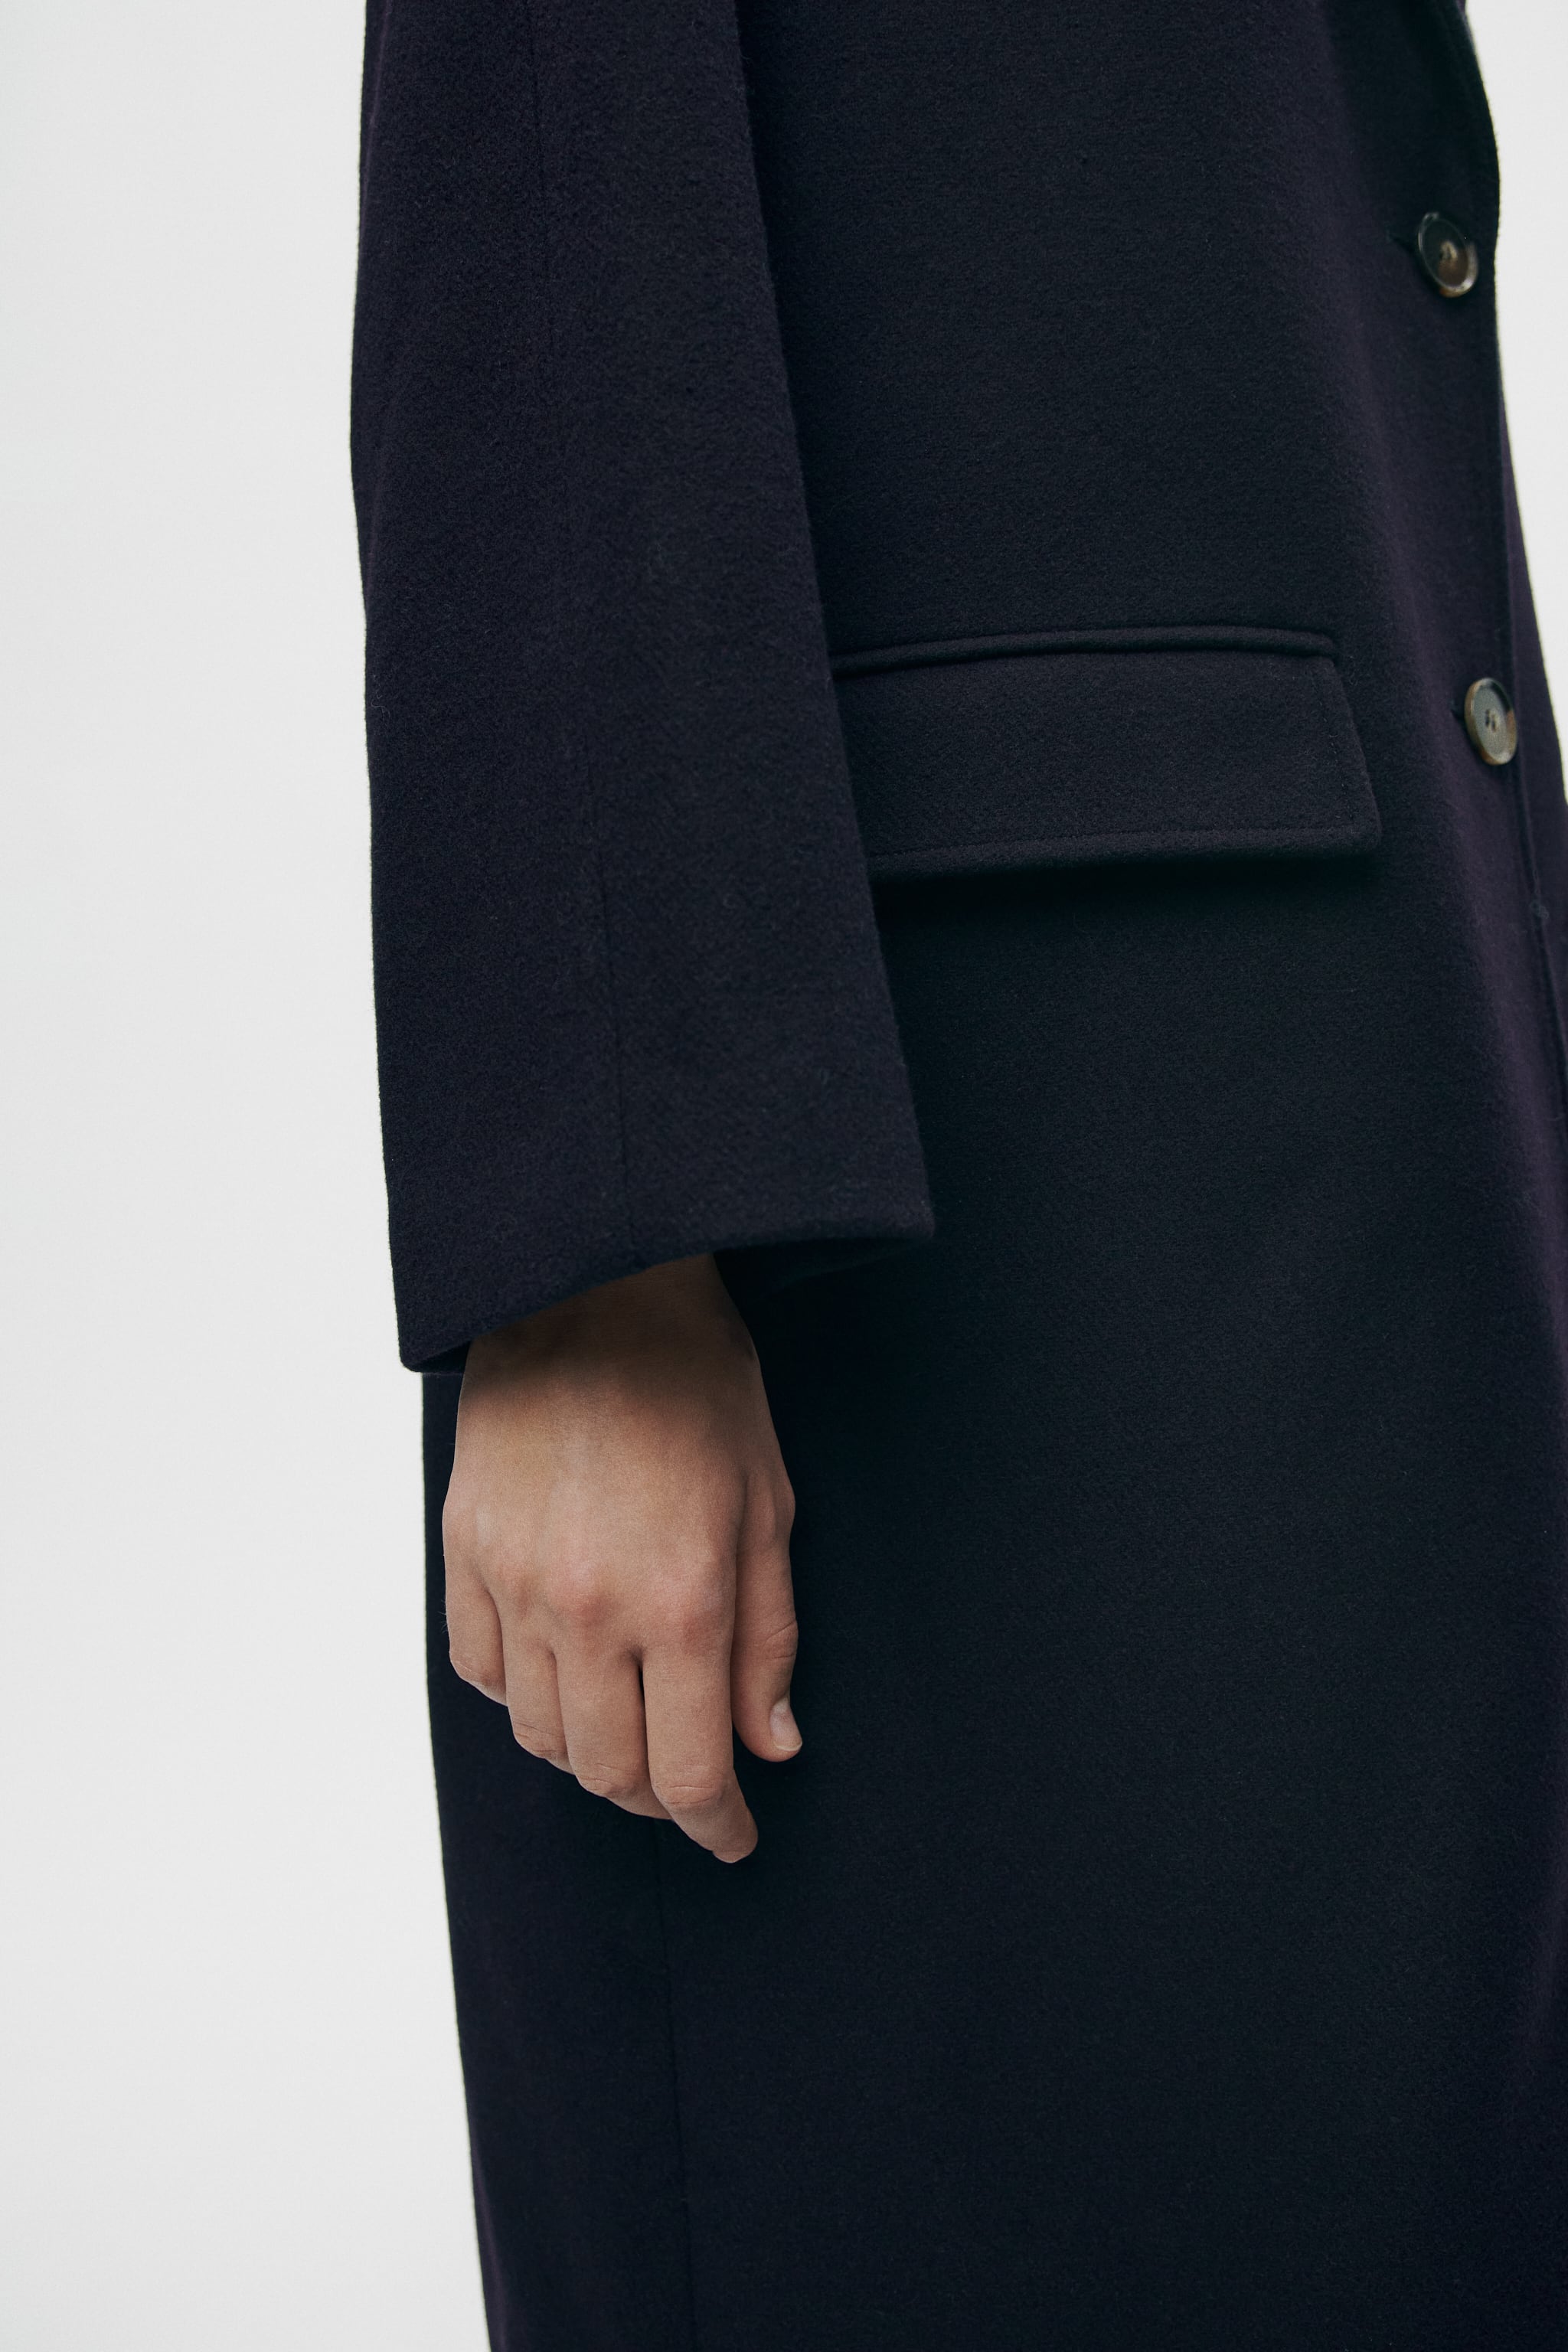 OVERSIZED WOOL BLEND COAT ZW COLLECTION